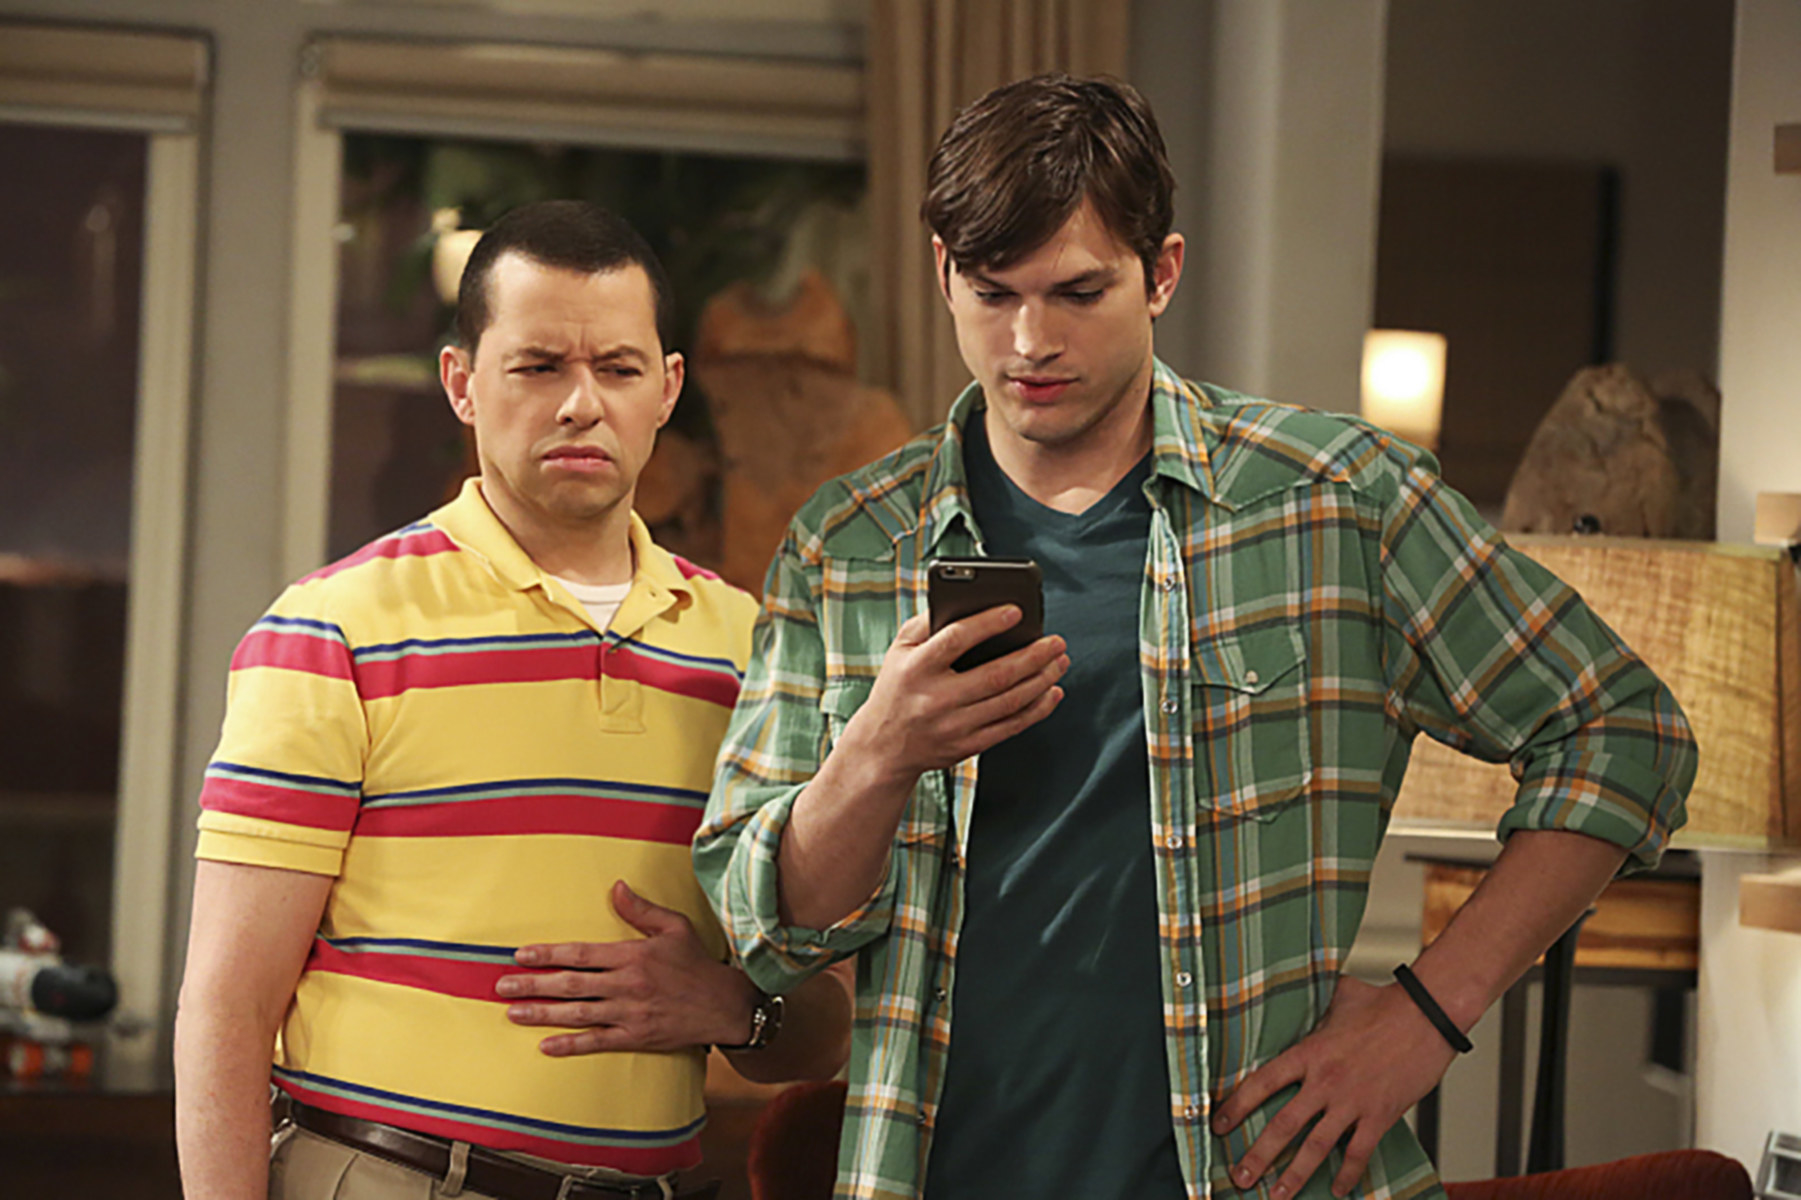 Jon Cryer and Ashton Kutcher in &quot;Two and a Half Men&quot;